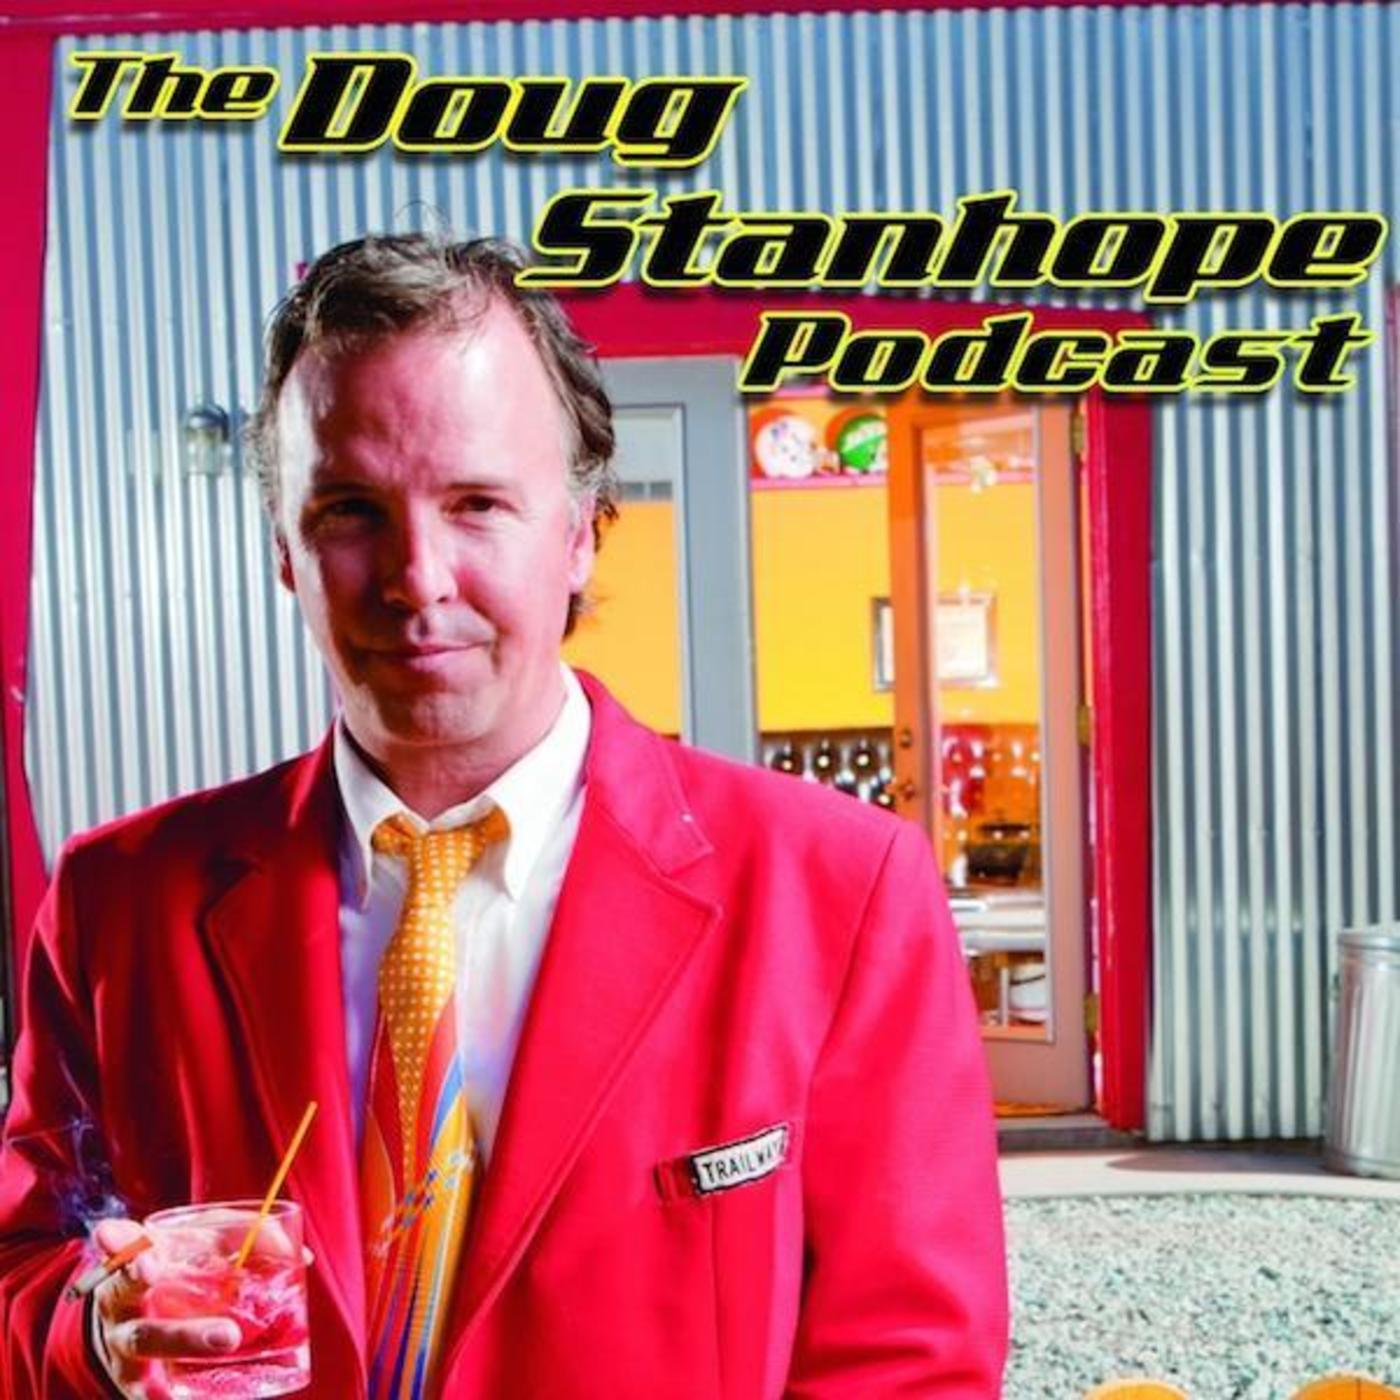 Stanhope Talks to Some 8 year old Kid - pt.1